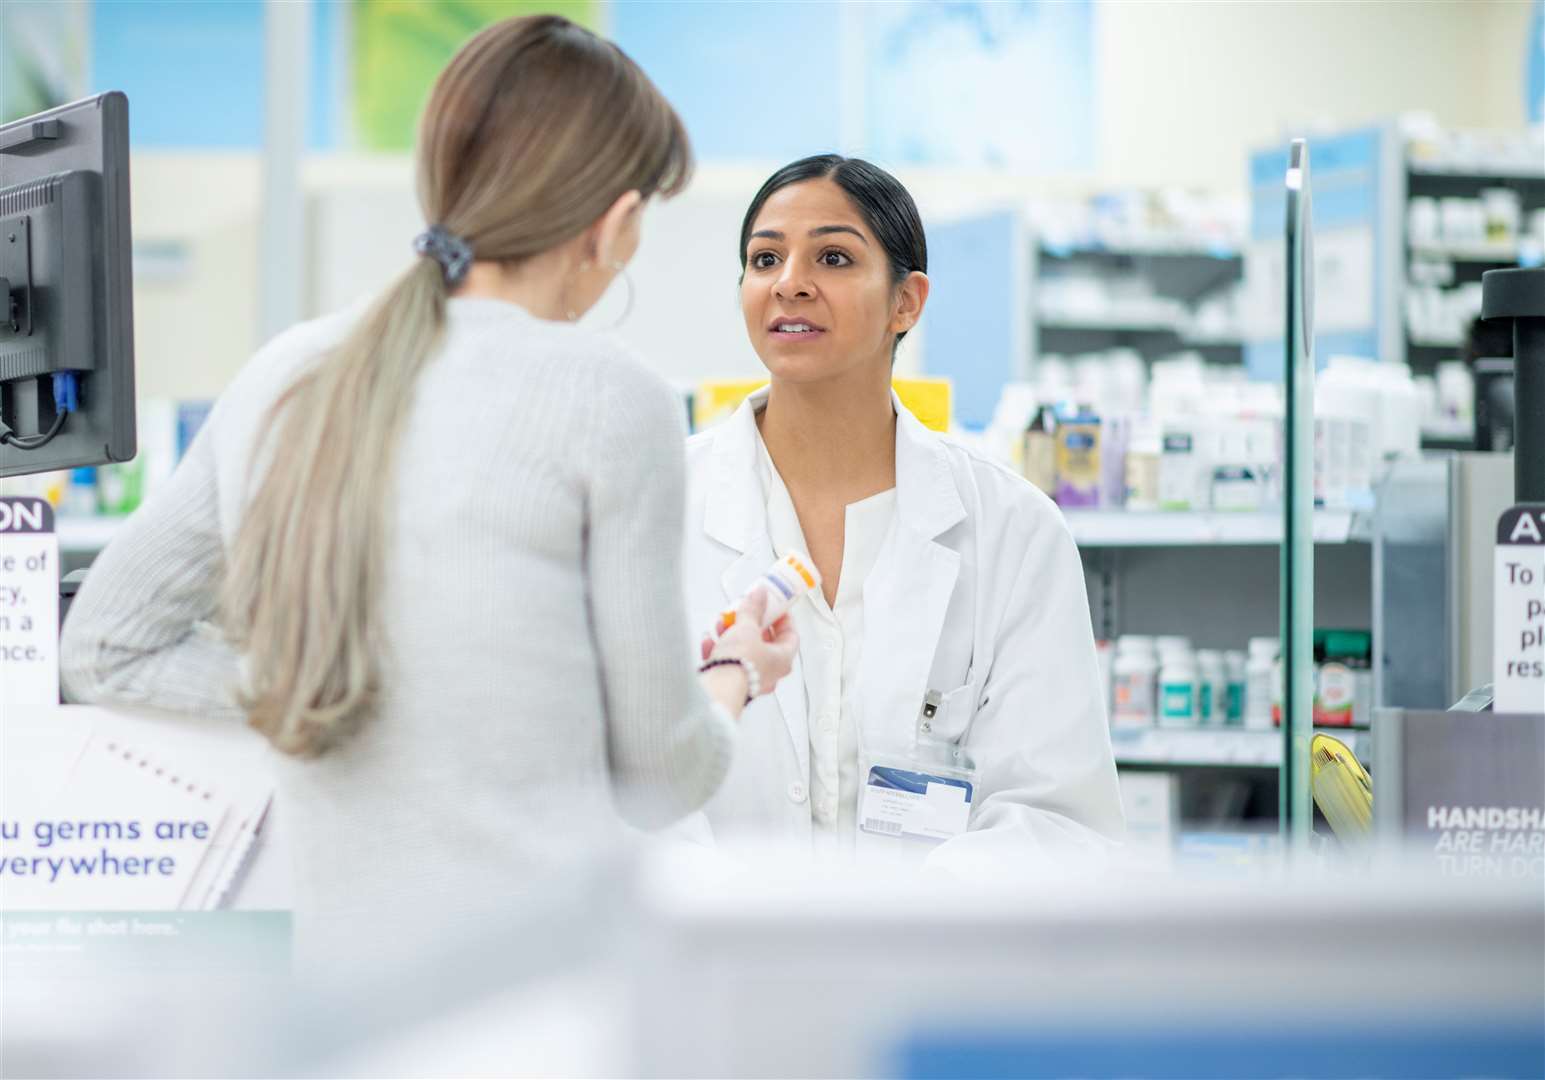 So far 10,000 pharmacies have registered for the service. Image: iStock.